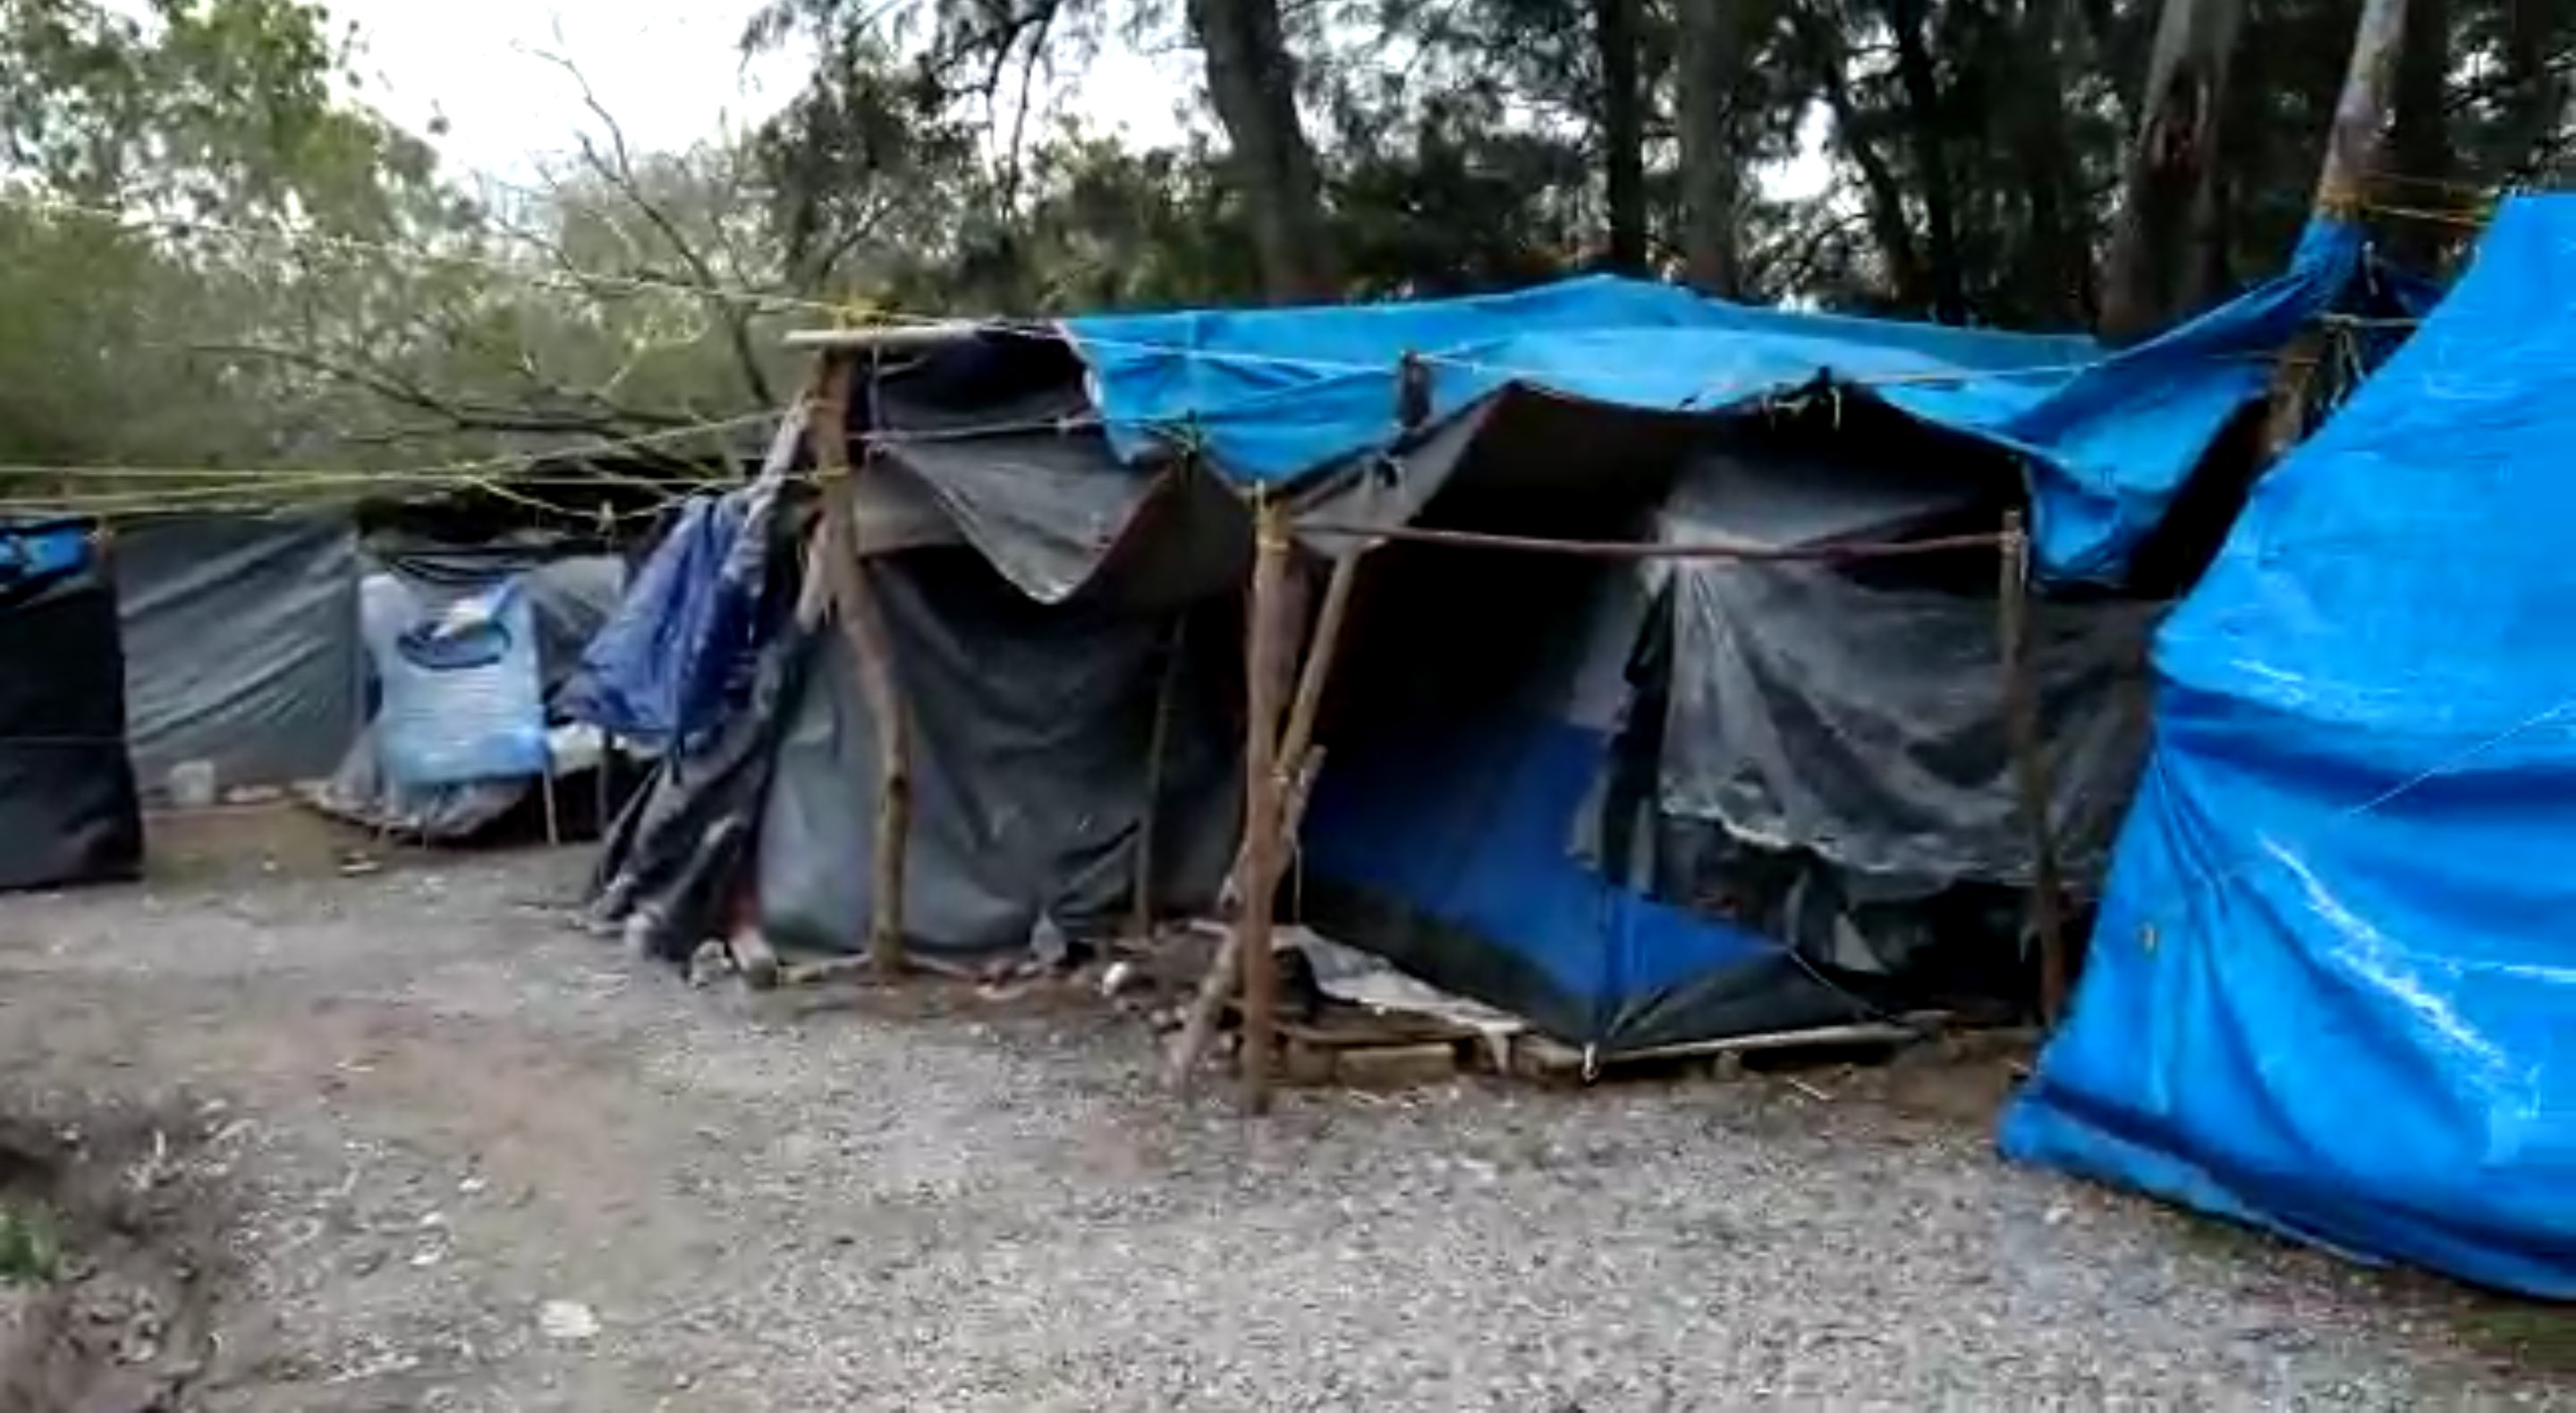 To clear out Tent City, commissioners back shelter near fairgrounds - News  - The Palm Beach Post - West Palm Beach, FL